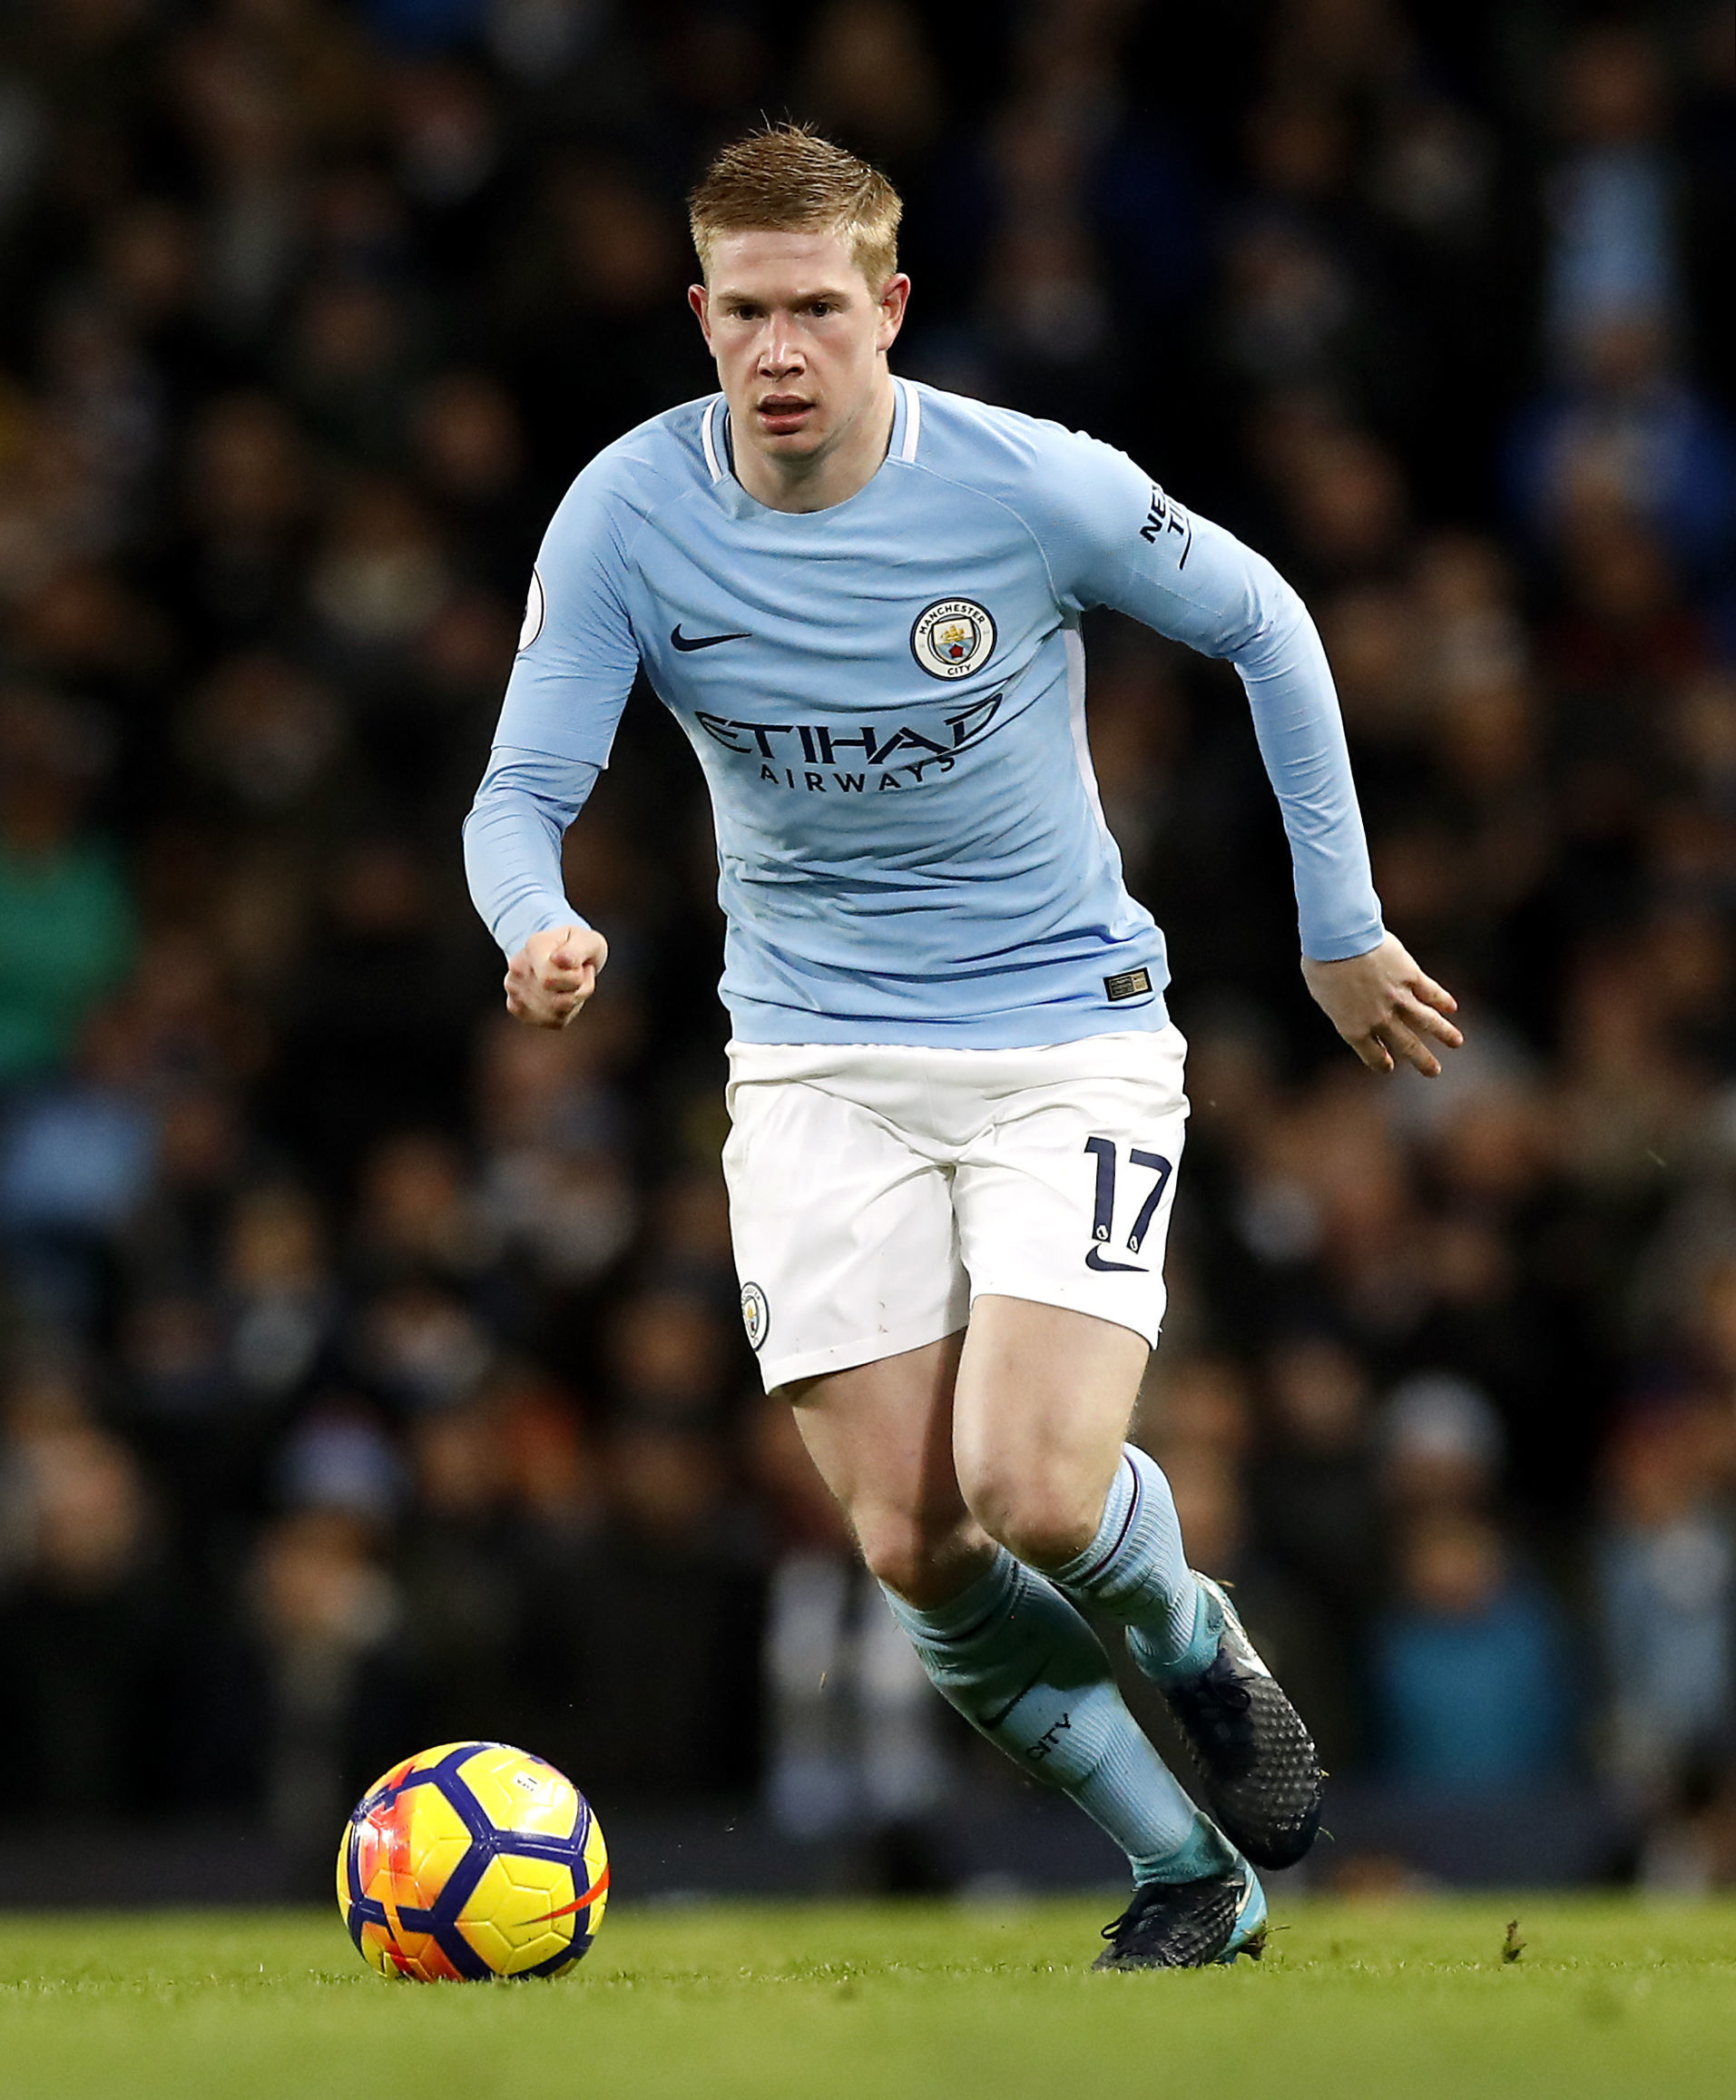 Sheikh Mansour has ordered City to keep Kevin De Bruyne and their other star players if Uefa Champion's League ban is upheld [더선] 만수르는 시티를 손절하지 않을 것